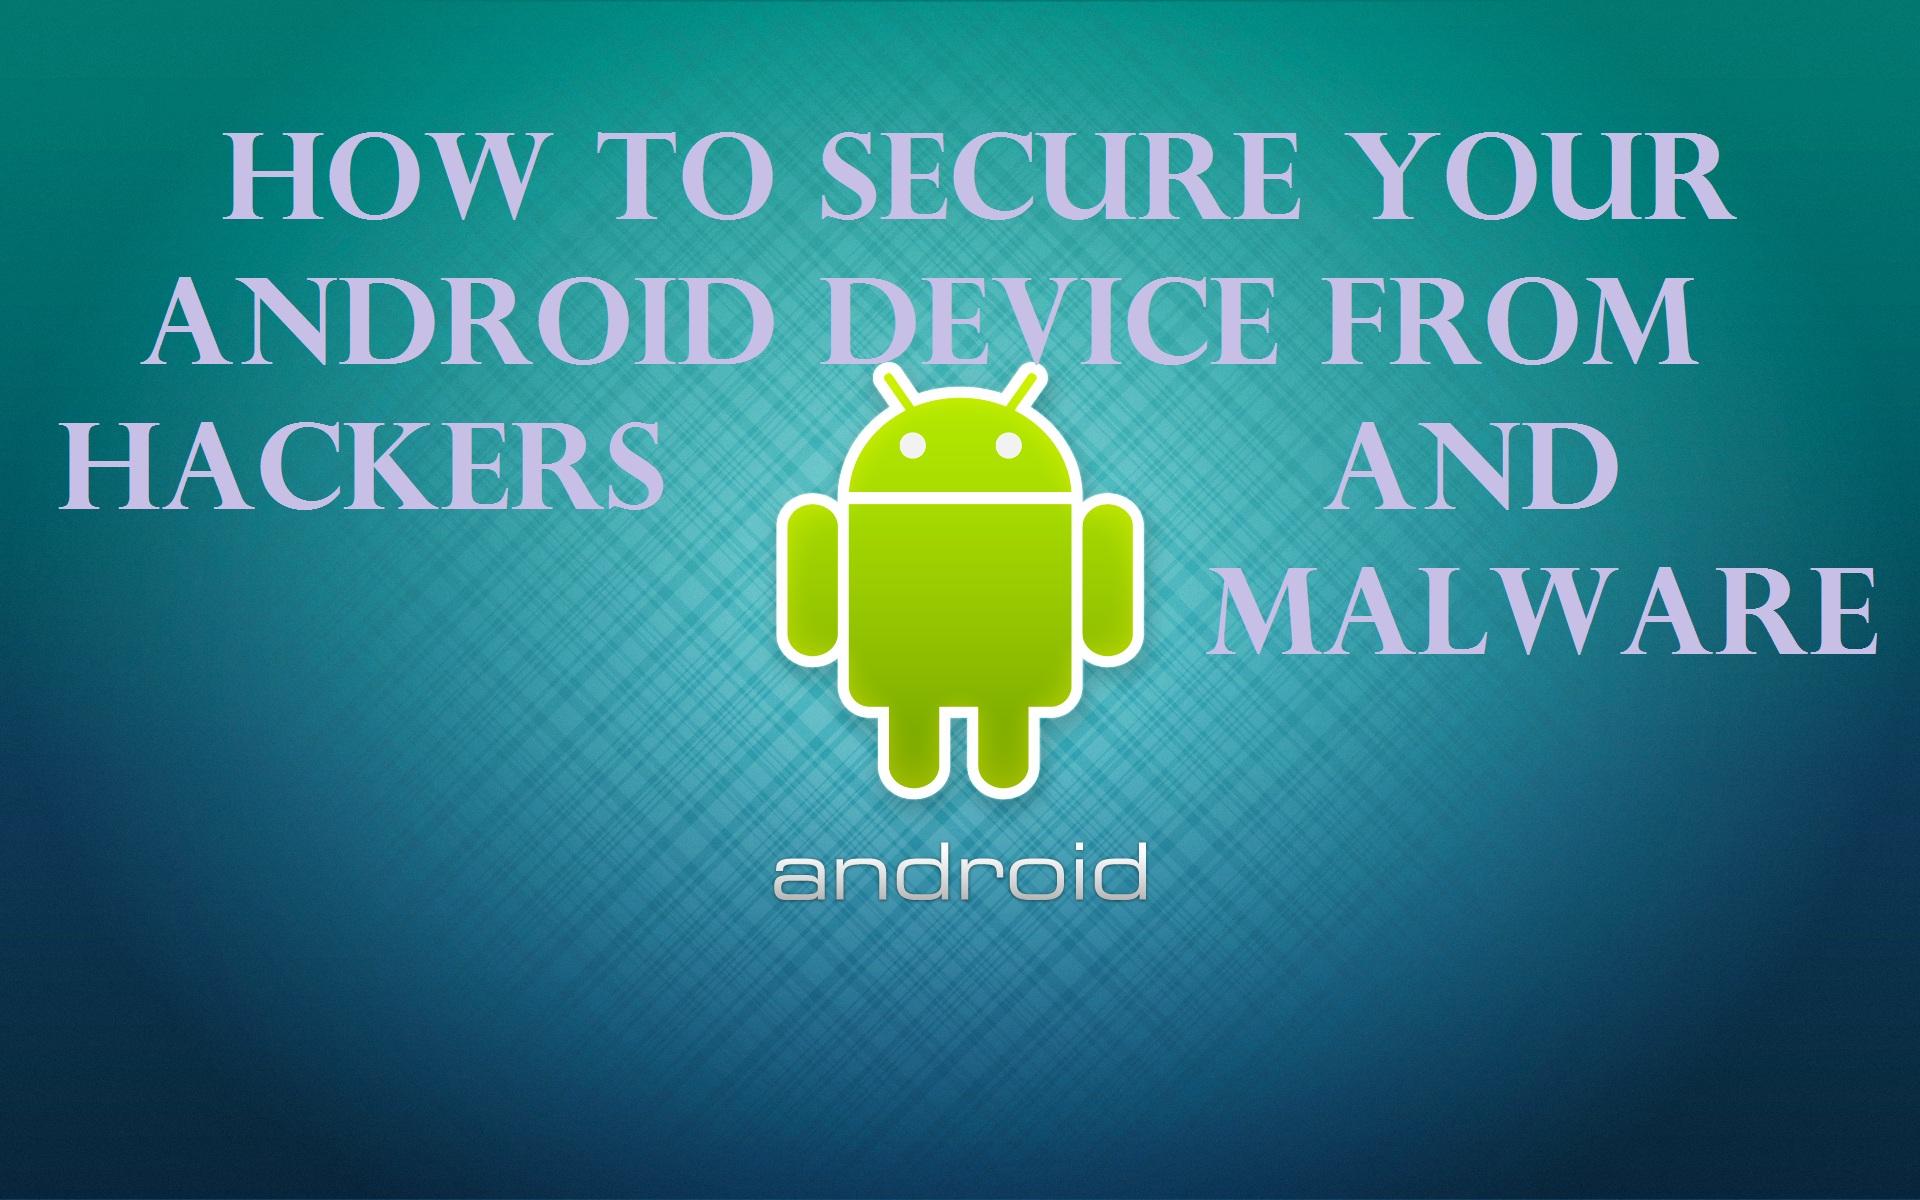 Banner of Don't Be a Victim of Cyber Attacks: How to Secure Your Android Device